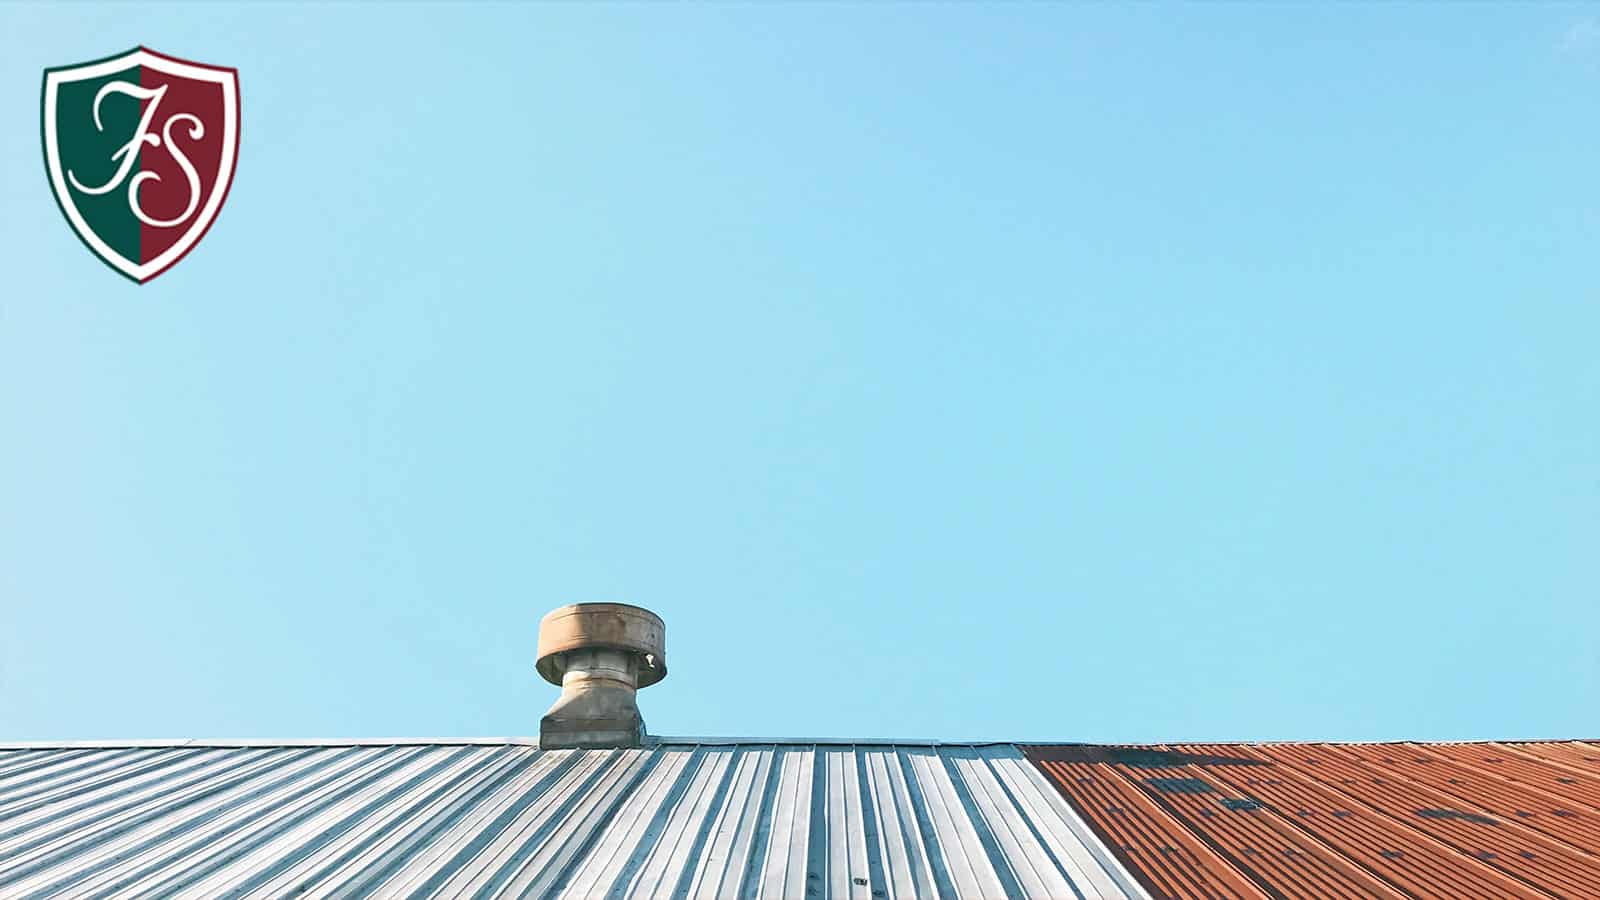 Find out everything you need to know about metal roofs for your house or business.